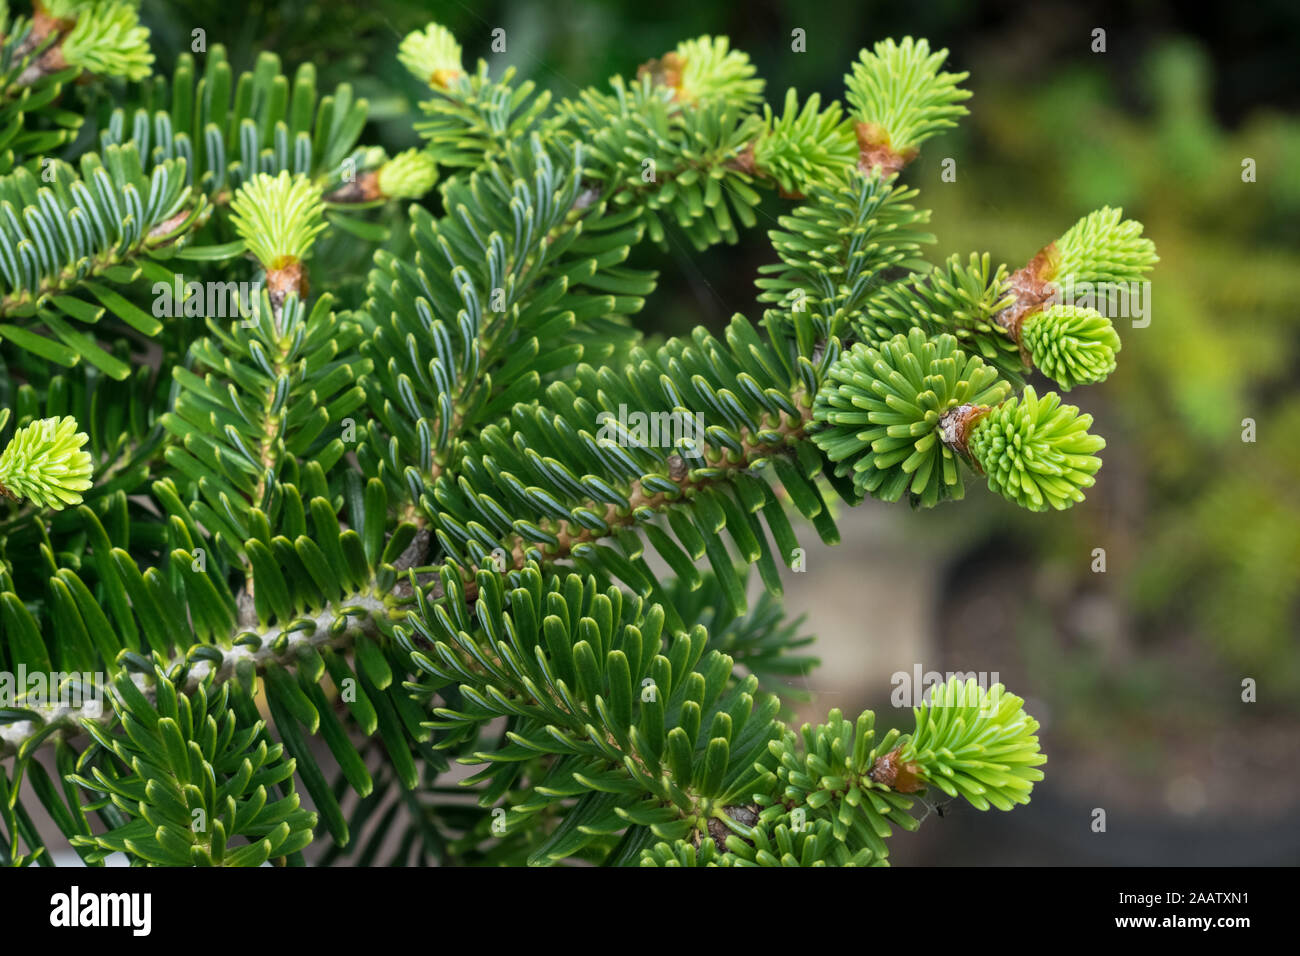 Detailed capture of new young shoots of Abies numidica (Algerian fir) in a botanical garden Stock Photo